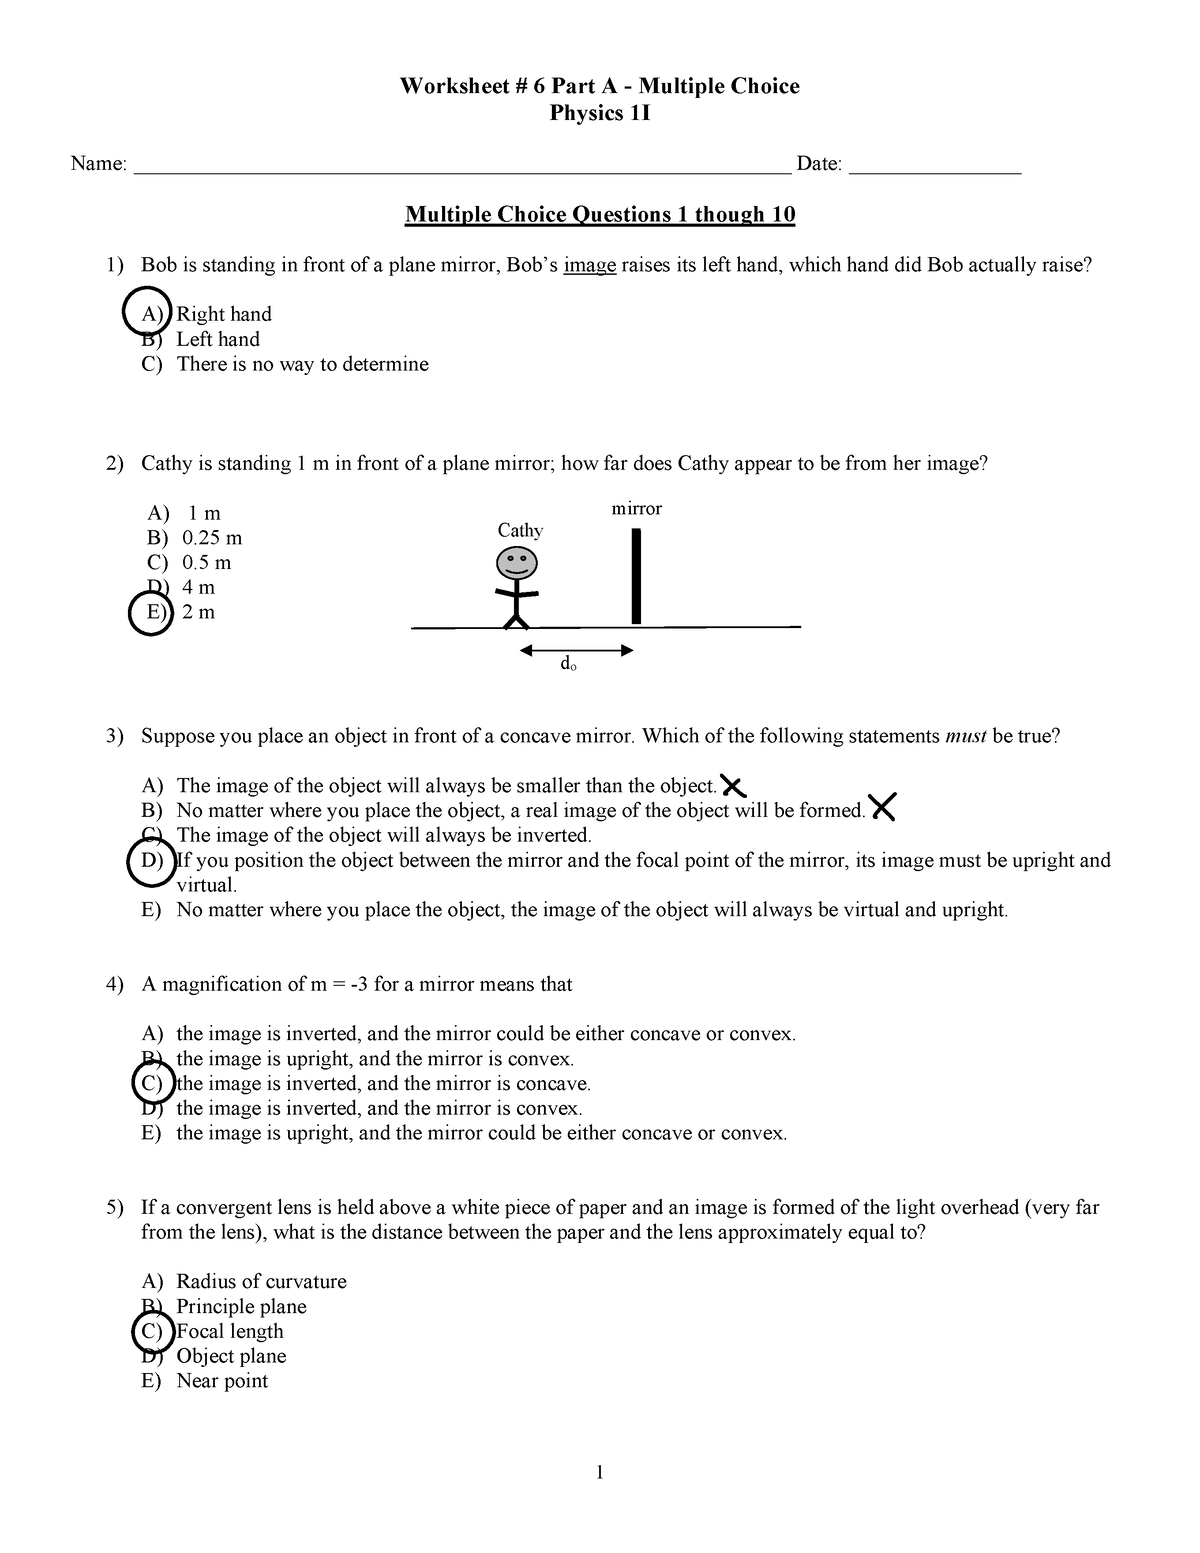 Worksheet #6 Mirrors Lots of extra practice working with and